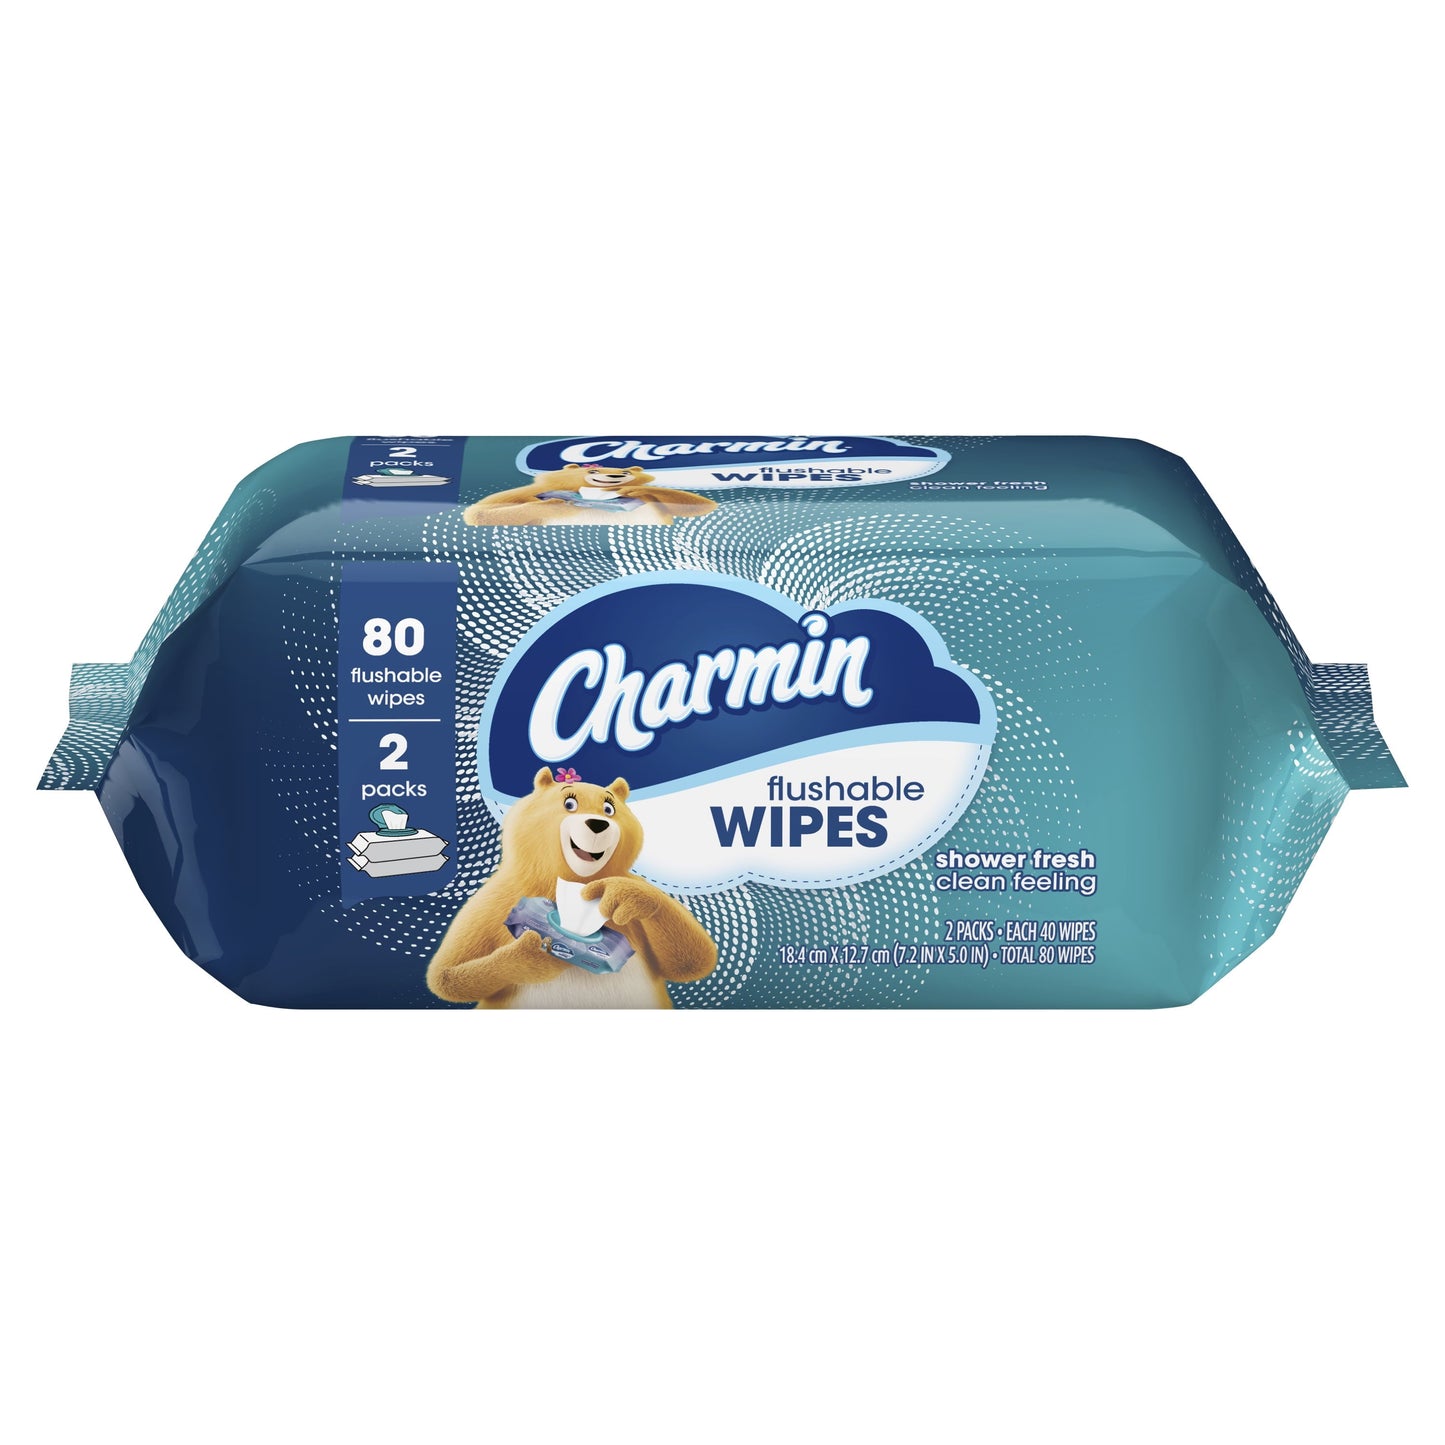 Charmin Flushable Wipes, 2 Flip-Top Packs, 40 Wipes per Pack, 80 Total Wipes